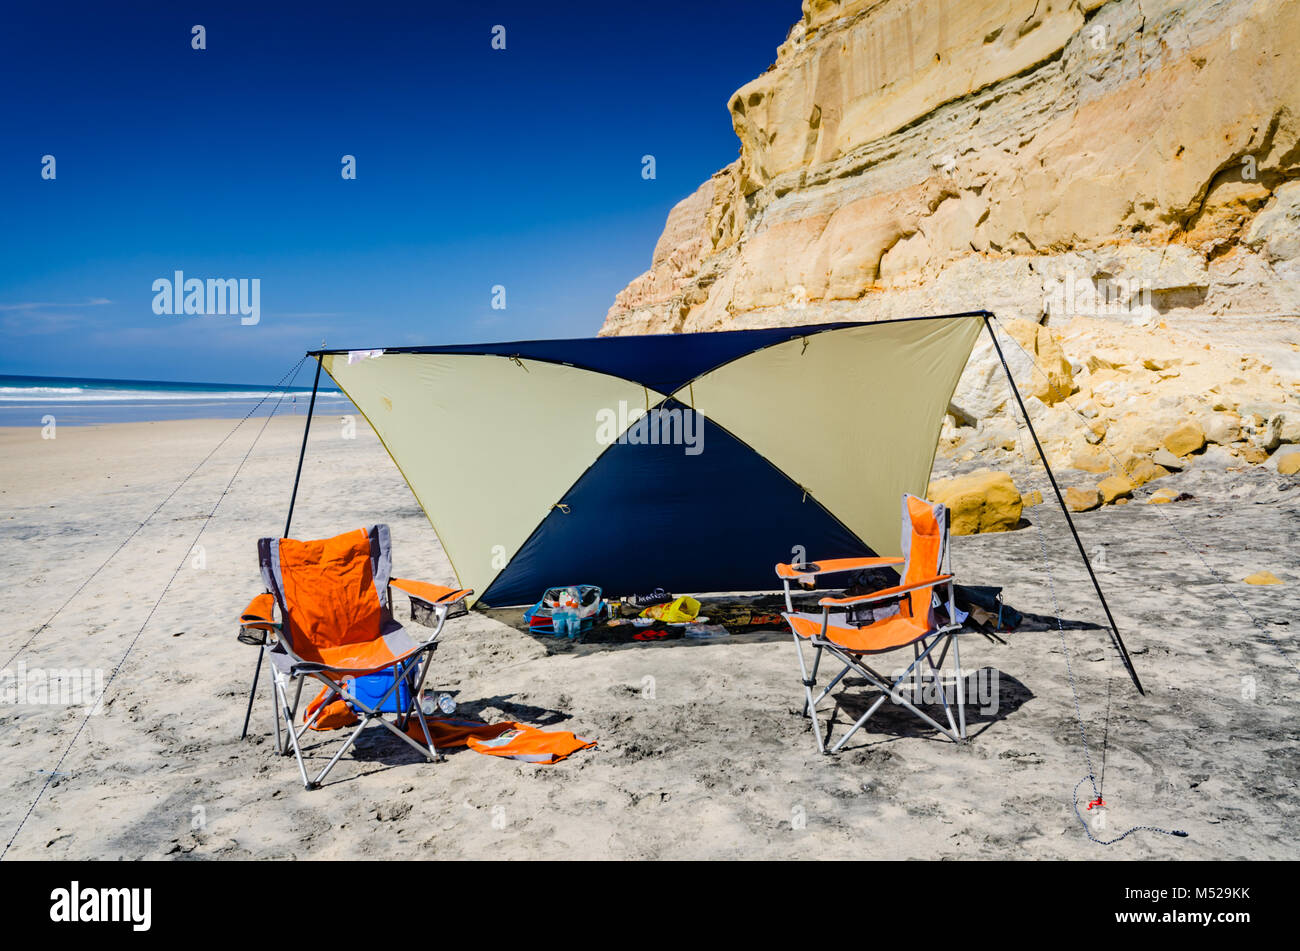 Tent shelters picnic on the beach at Torrey Pines State Natural Preserve near San Diego, California. Stock Photo